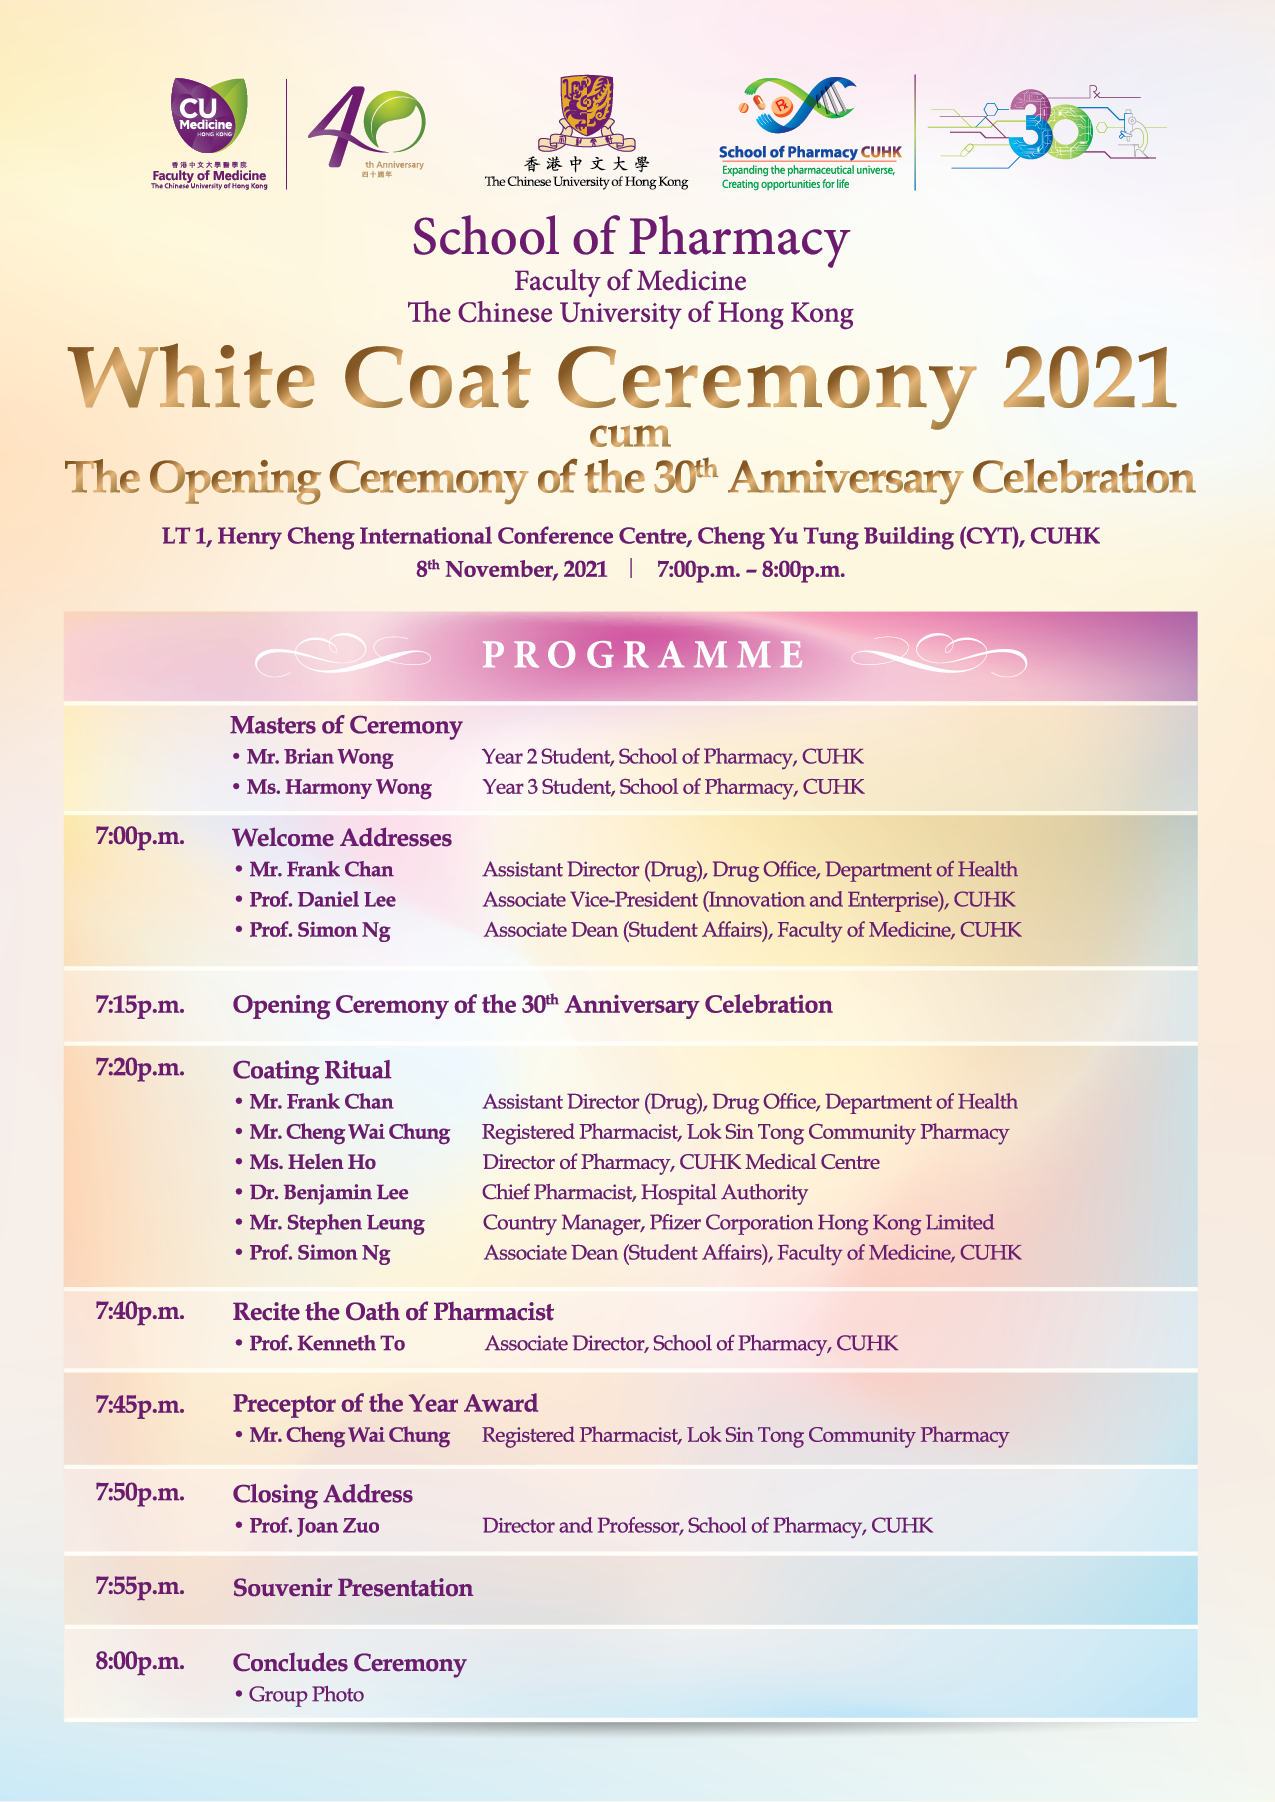 White Coat Ceremony 2021 cum The Opening Ceremony of the 30th Anniversary Celebration @ LT 1, Henry Cheng International Conference Centre, Cheng Yu Tung Building (CYT), The Chinese University of Hong Kong (University Exit B)